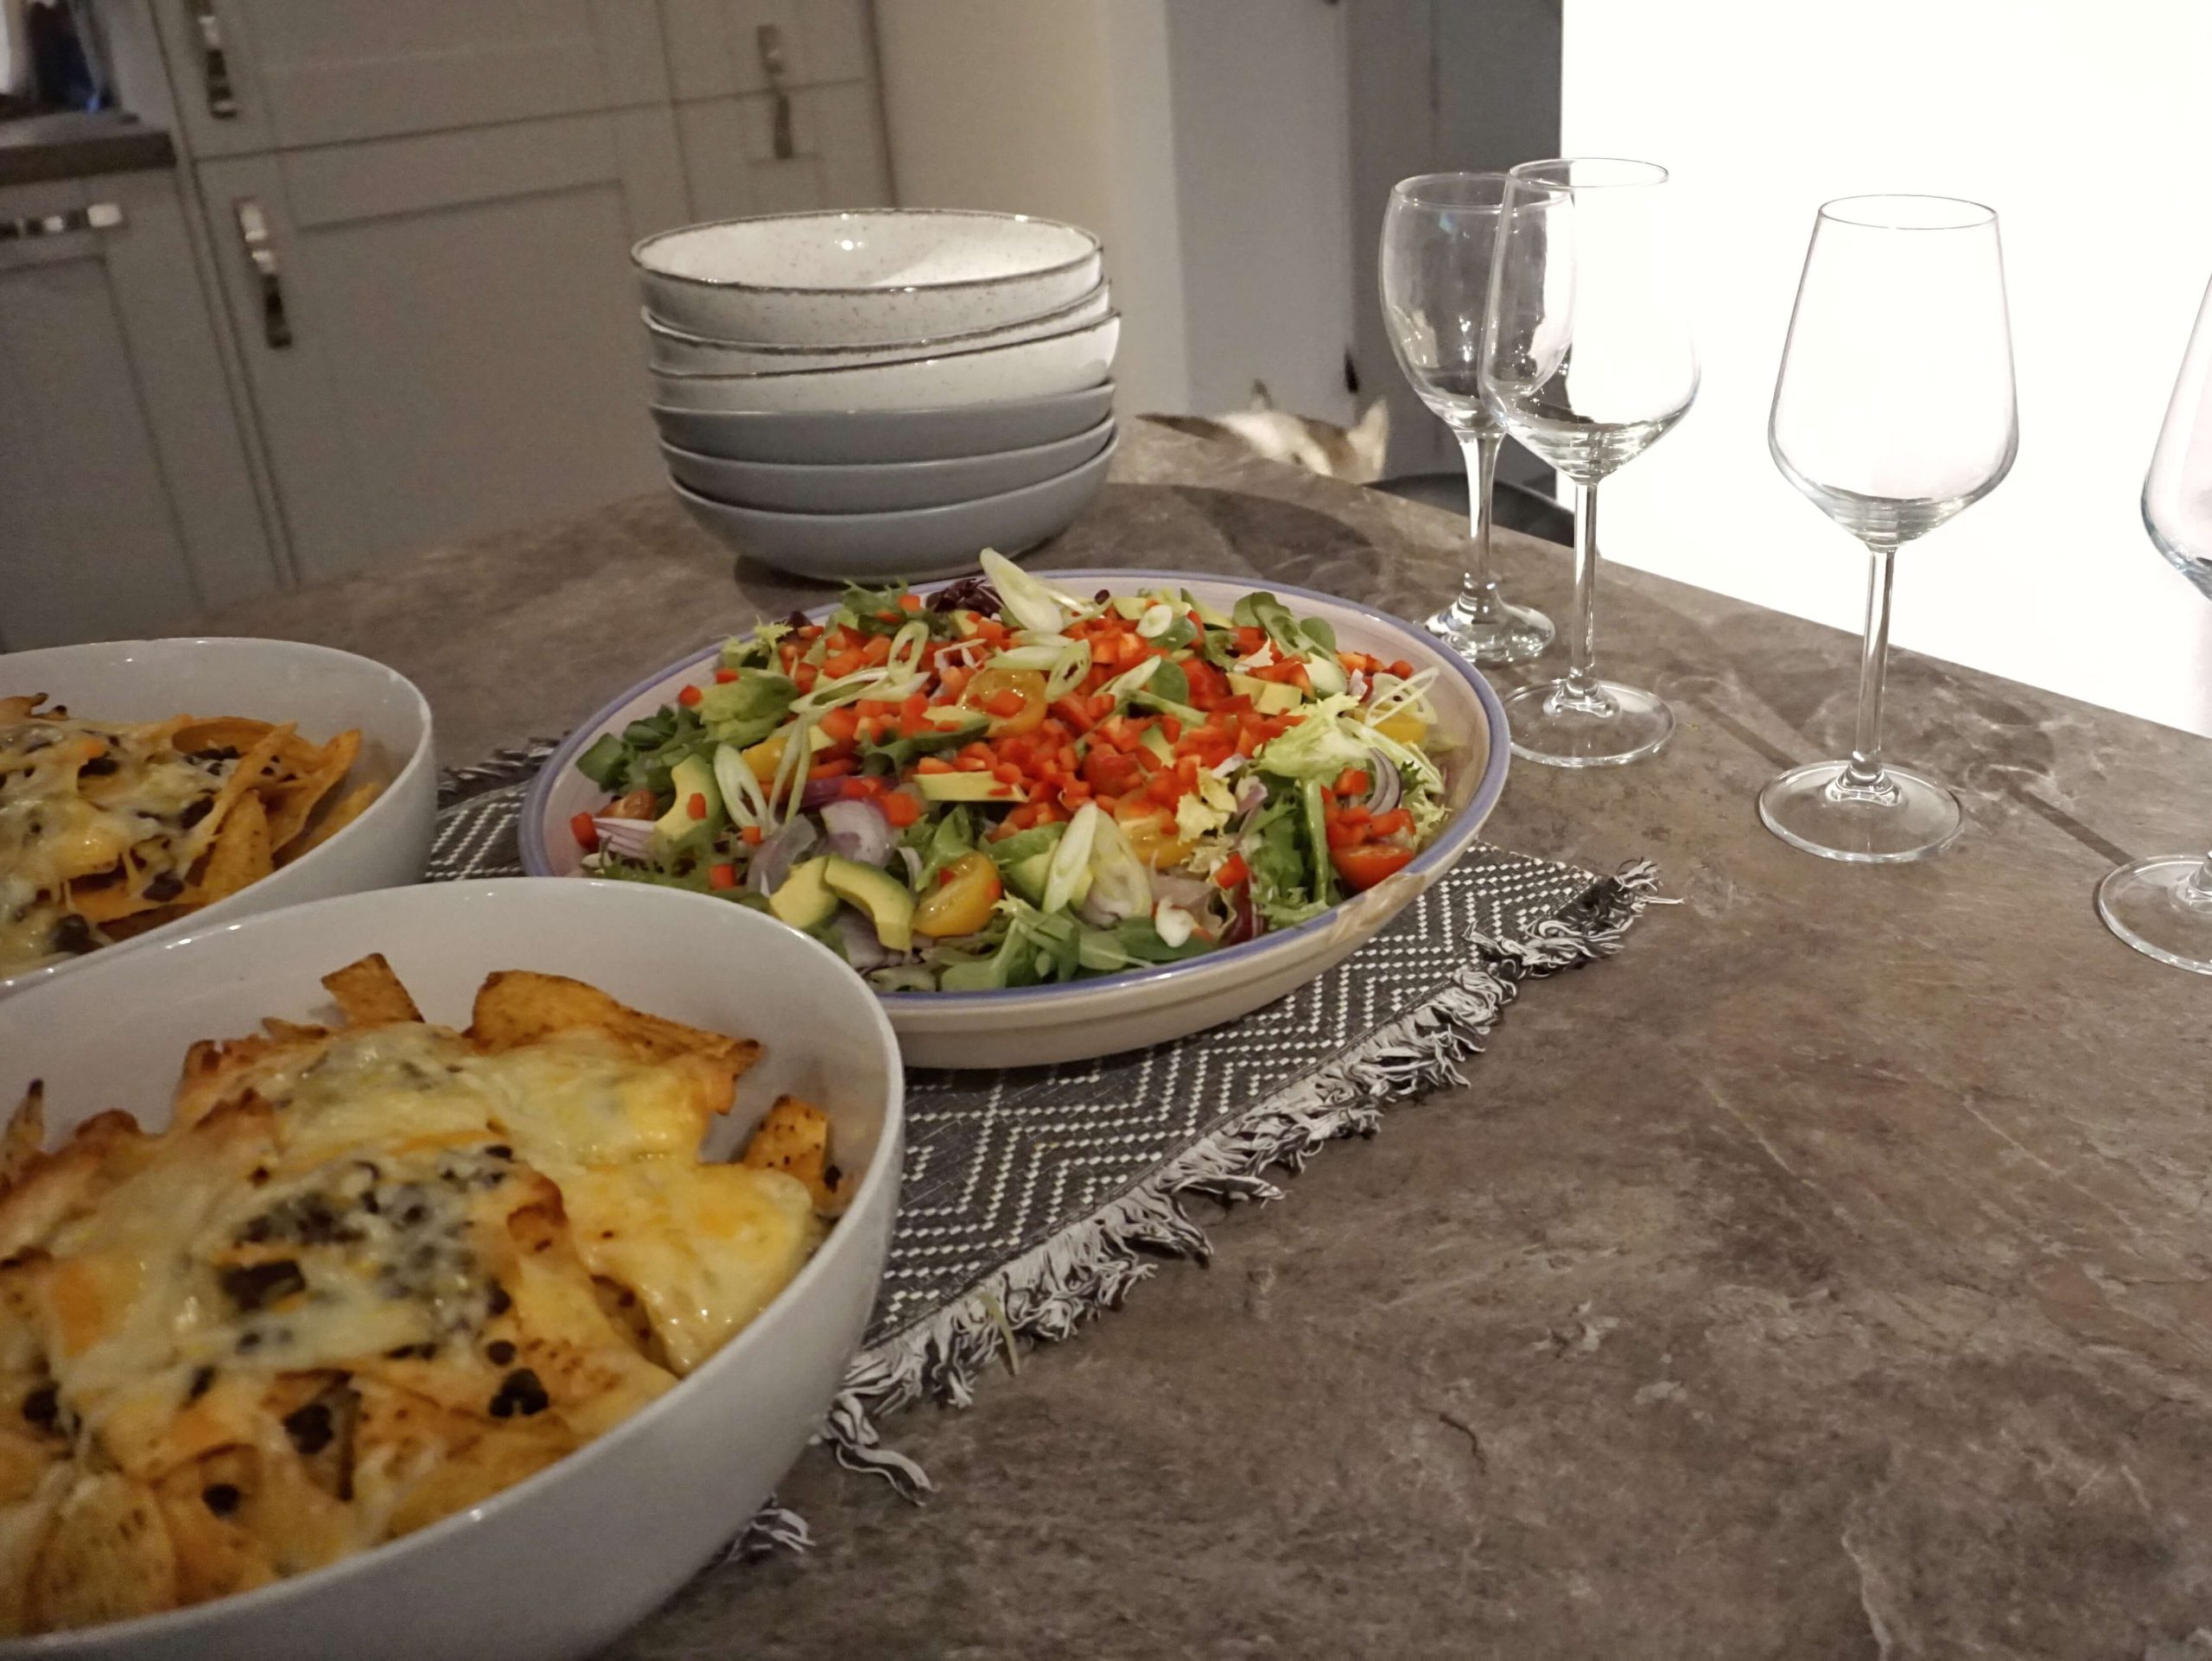 Fresh salad beside wine glasses and bowls stacked up for serving with loaded nachos in the foreground